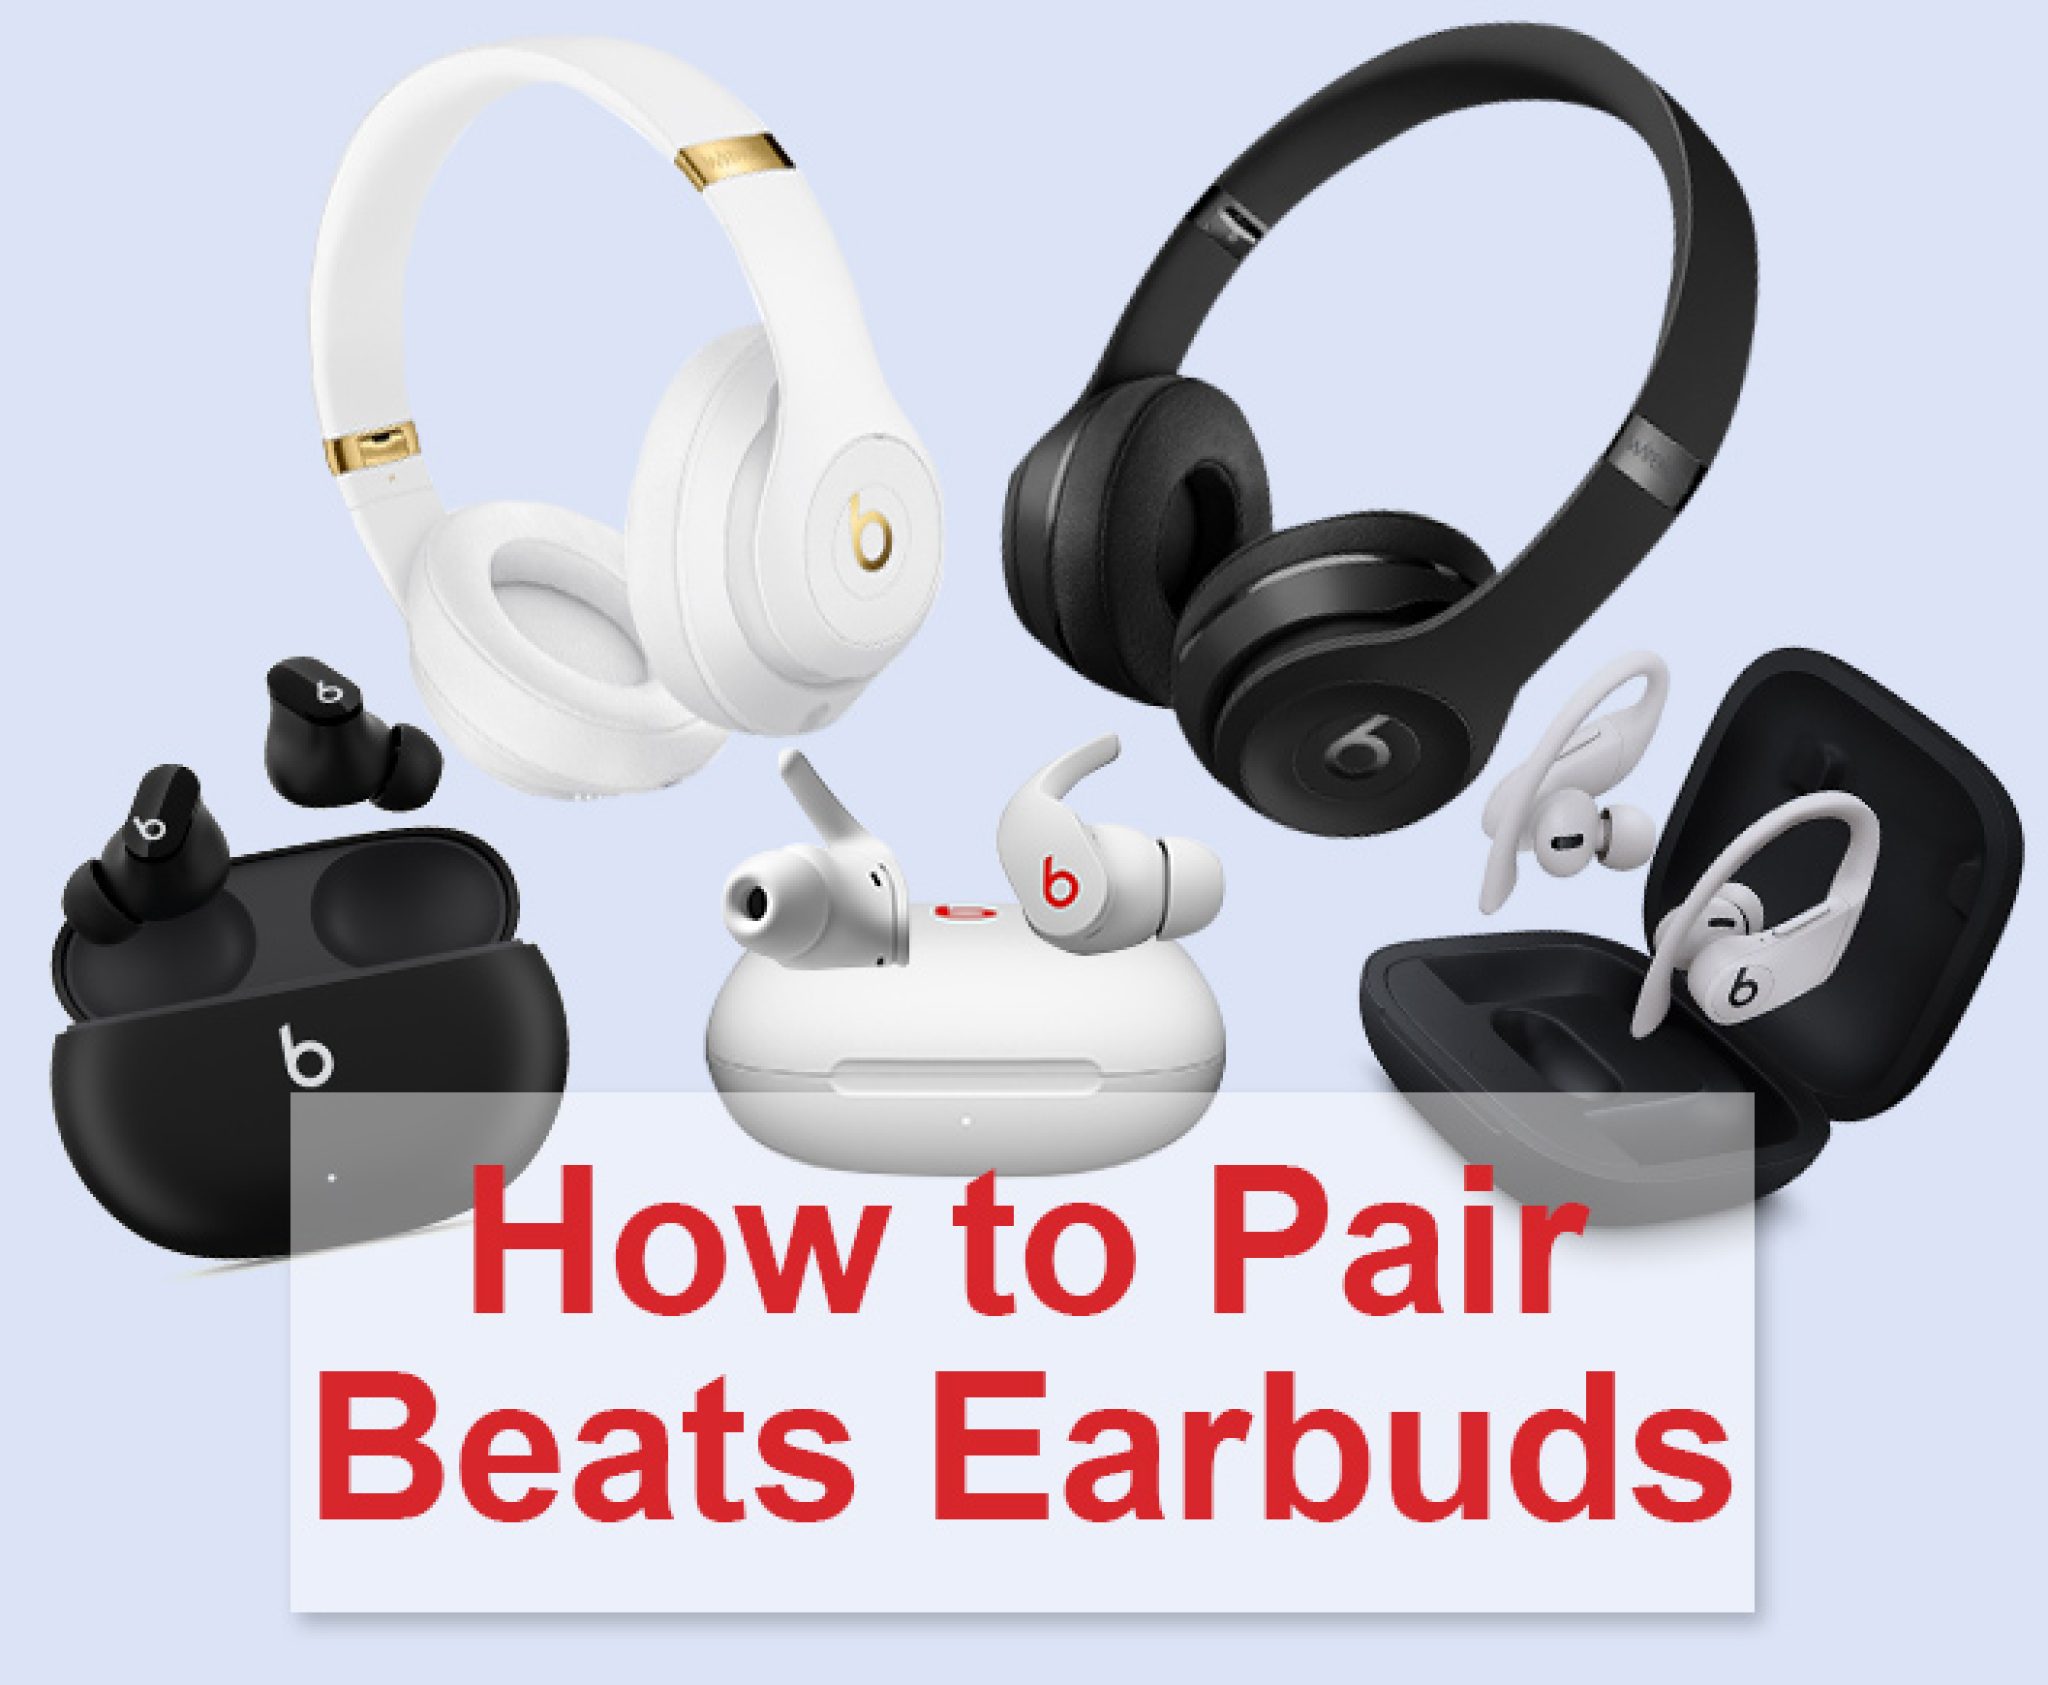 How to Pair Beats Earbuds: Guide for iPhone, Android and Laptop